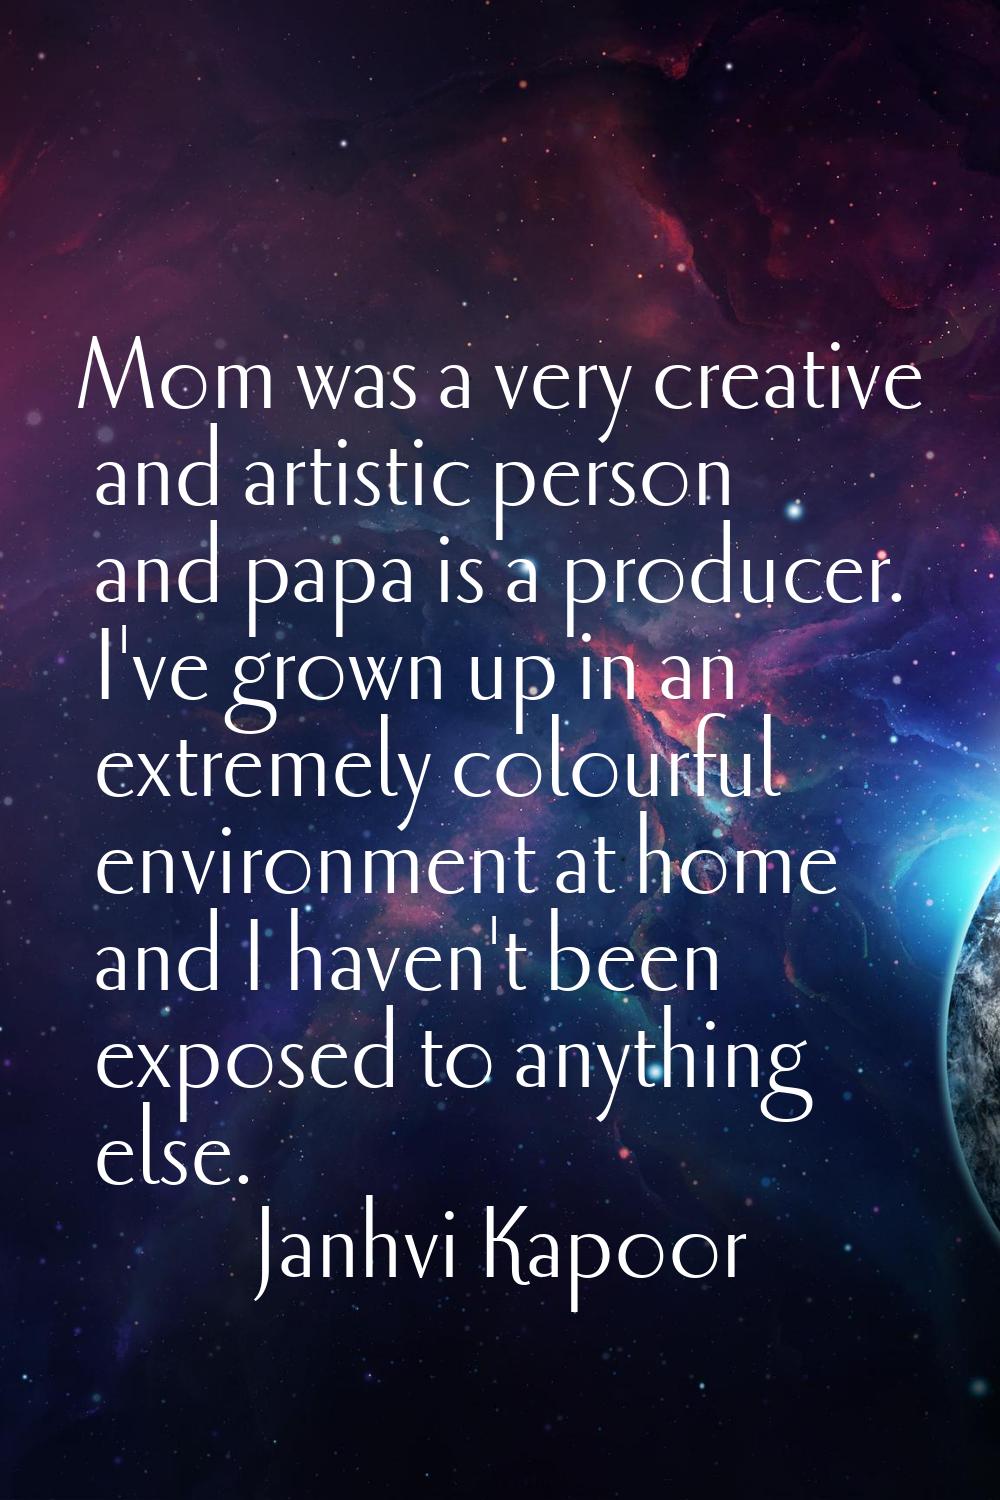 Mom was a very creative and artistic person and papa is a producer. I've grown up in an extremely c